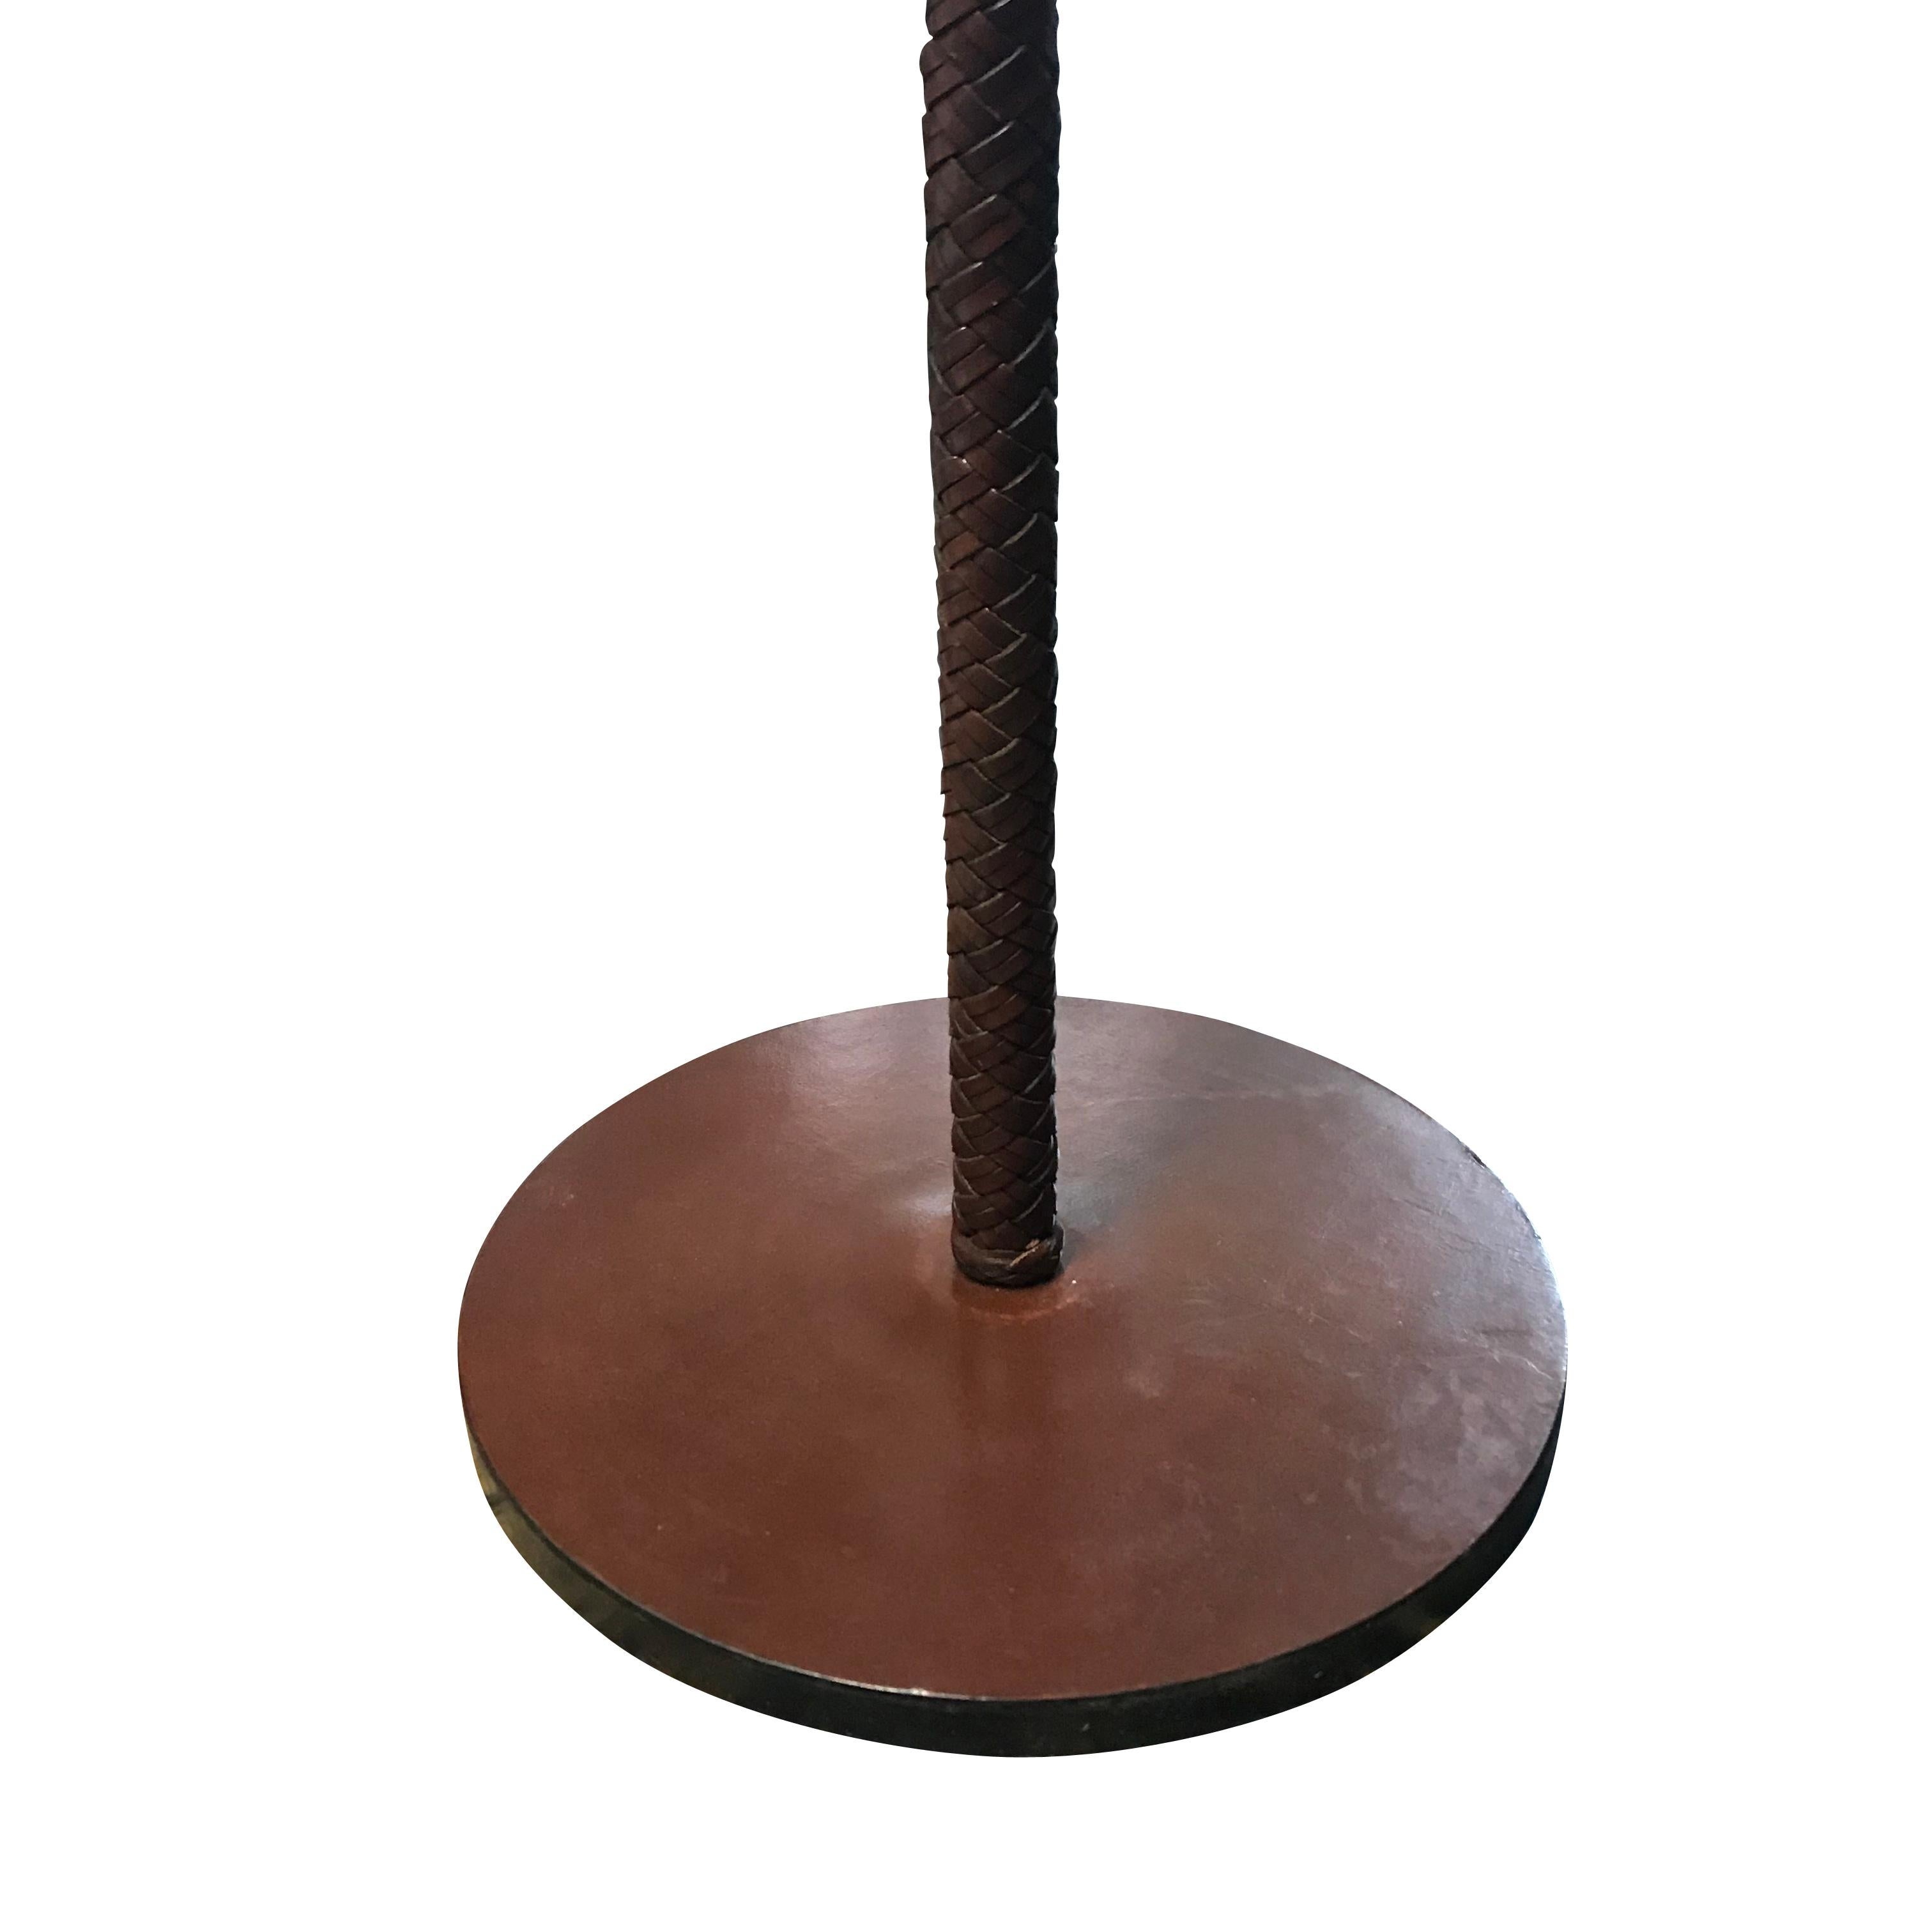 Midcentury French brown braided leather floor lamp.
Newly rewired
Measures: Overall height including shade 55.5